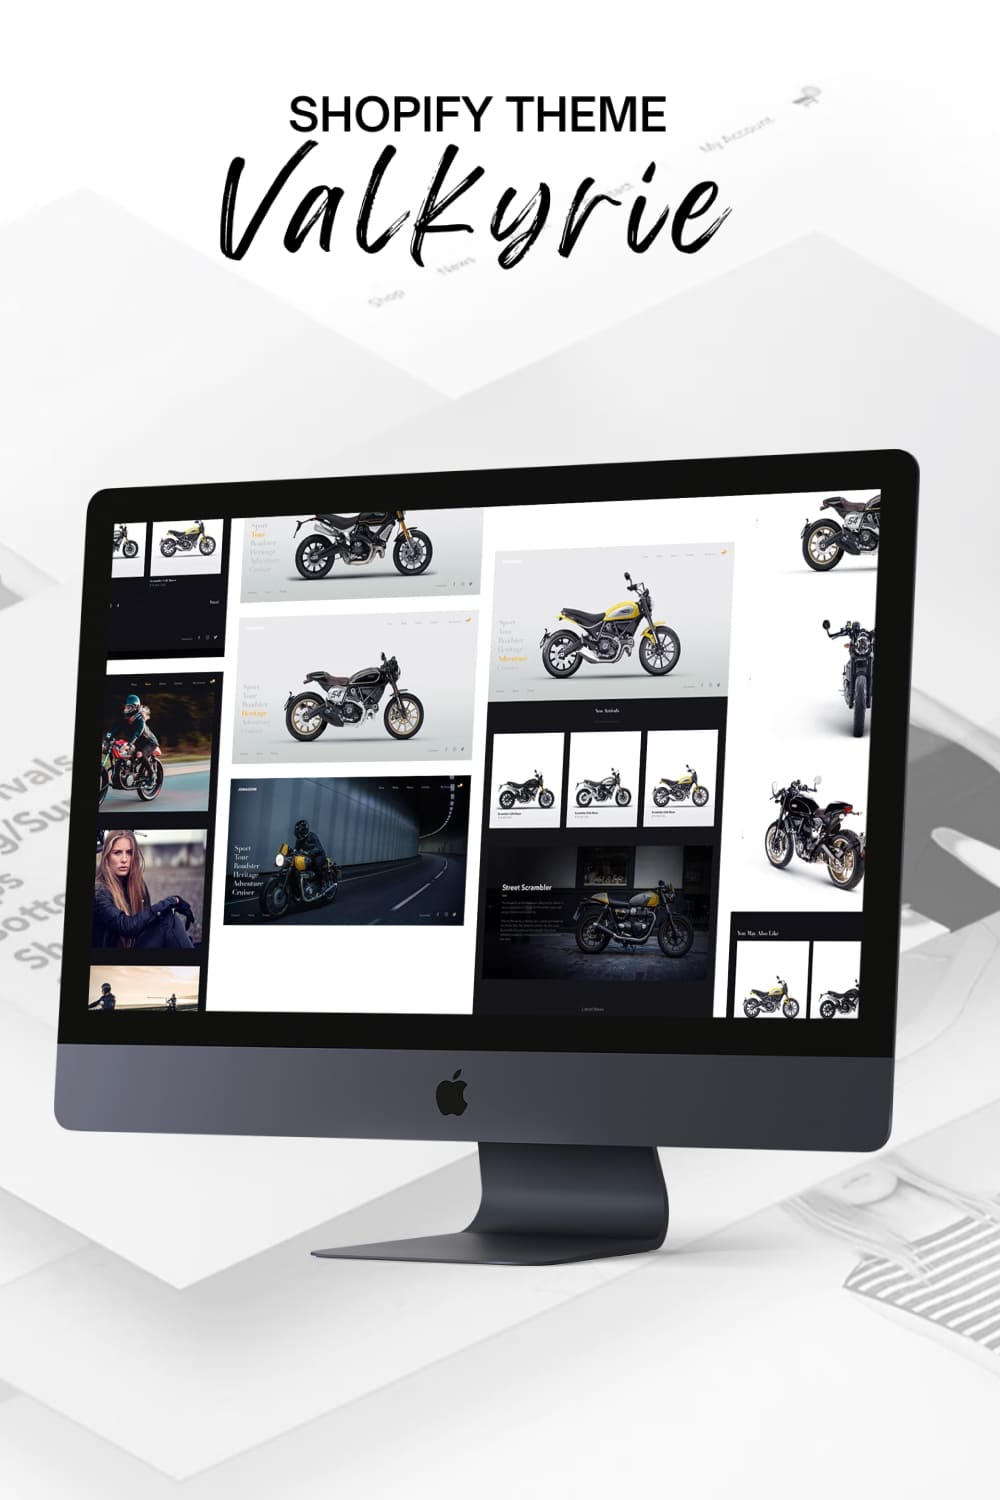 Preview Valkyrie shopify theme on the computer.